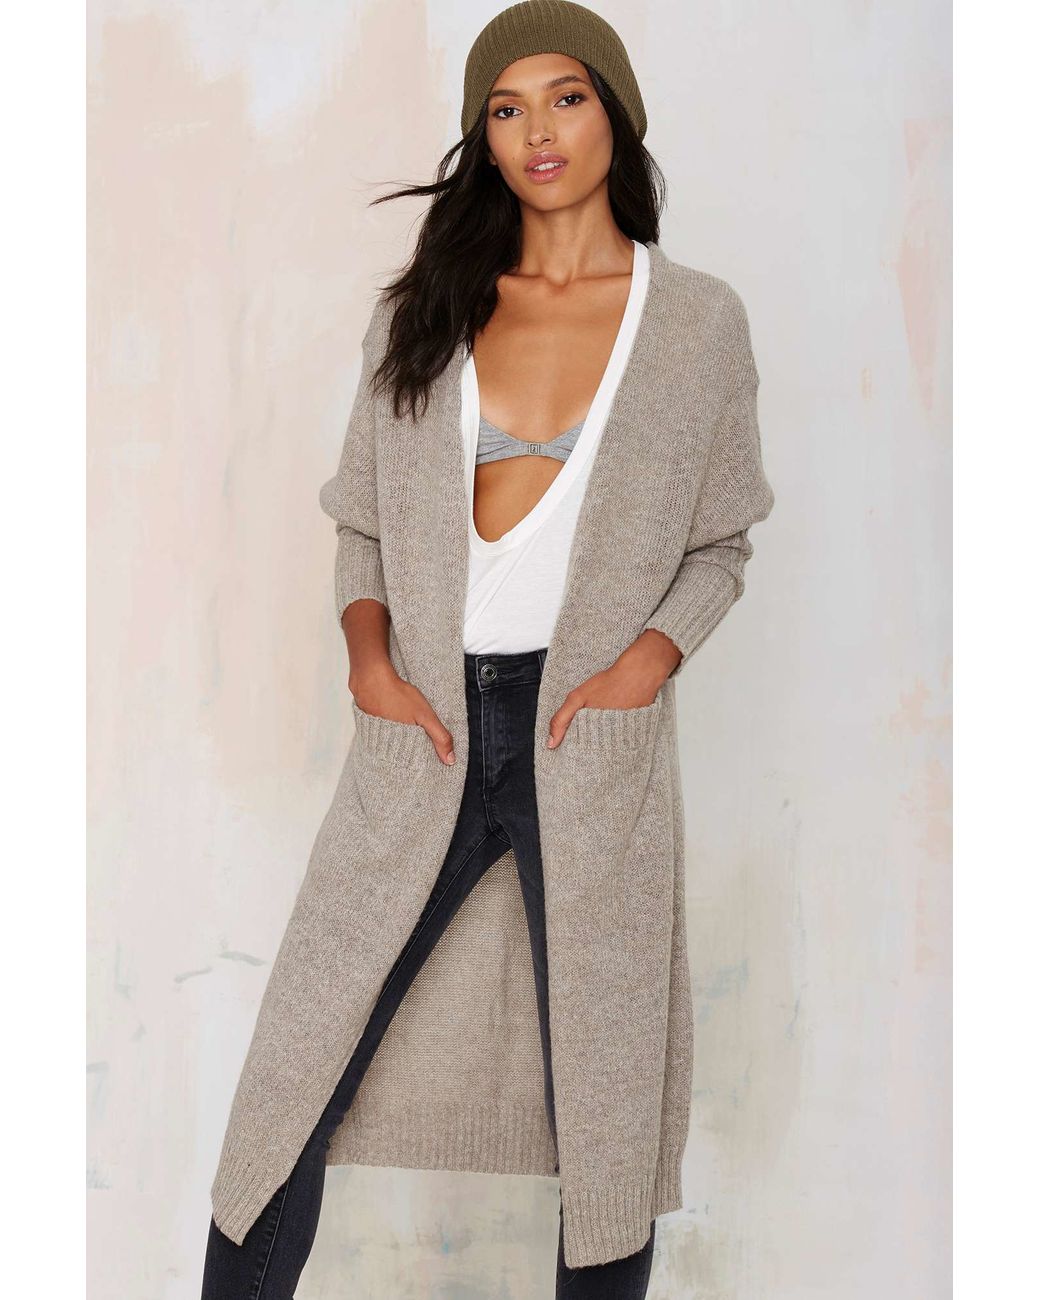 Nasty Gal So Heated Duster Cardigan in Natural | Lyst